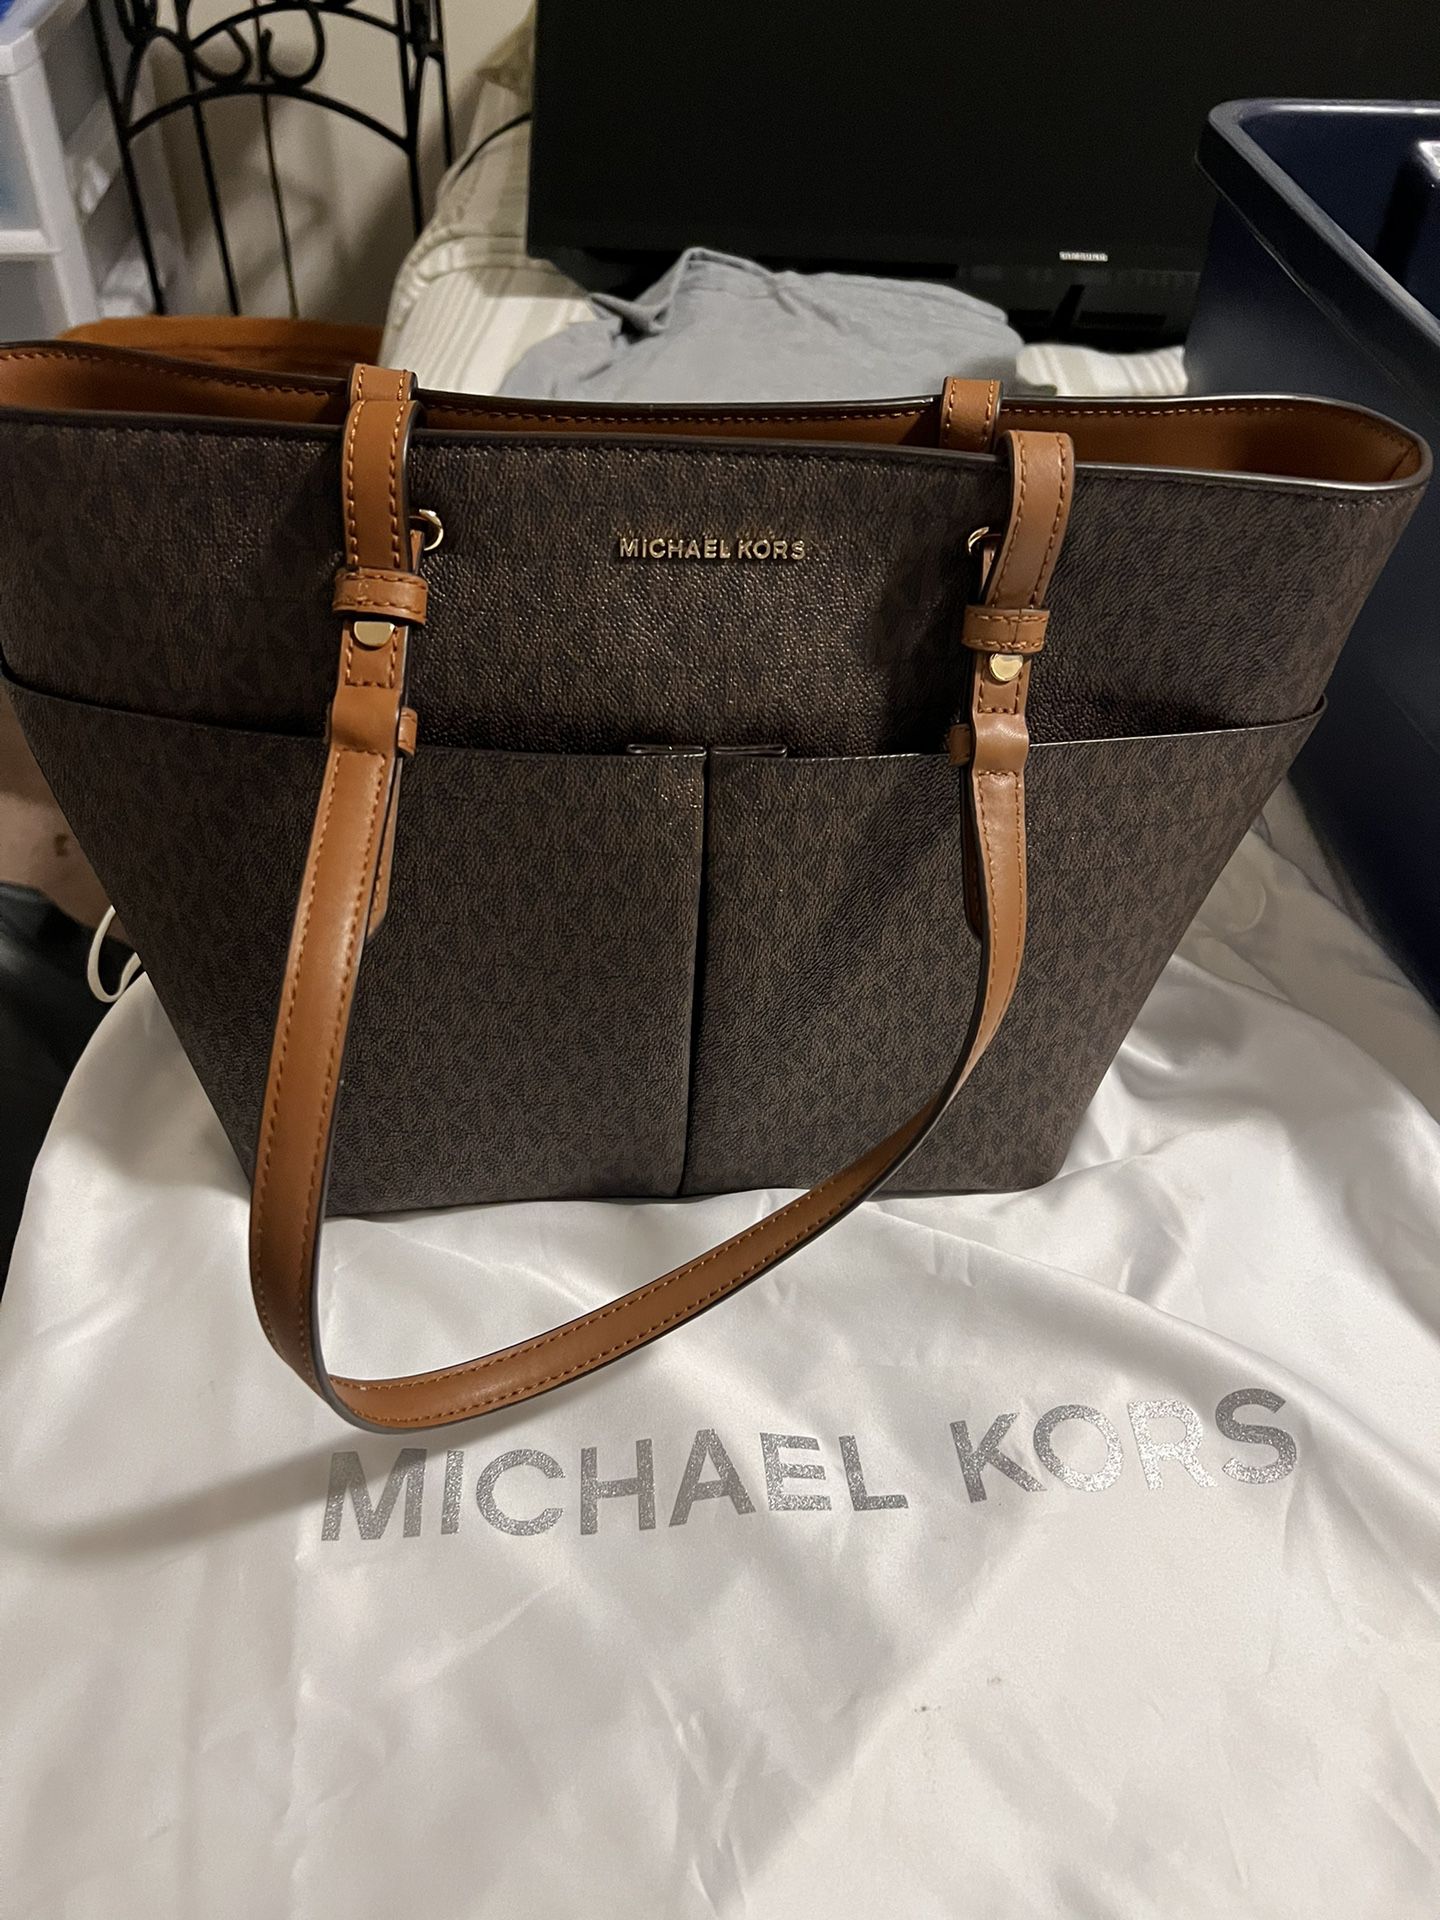 Michael Kors Purse New With Tags 